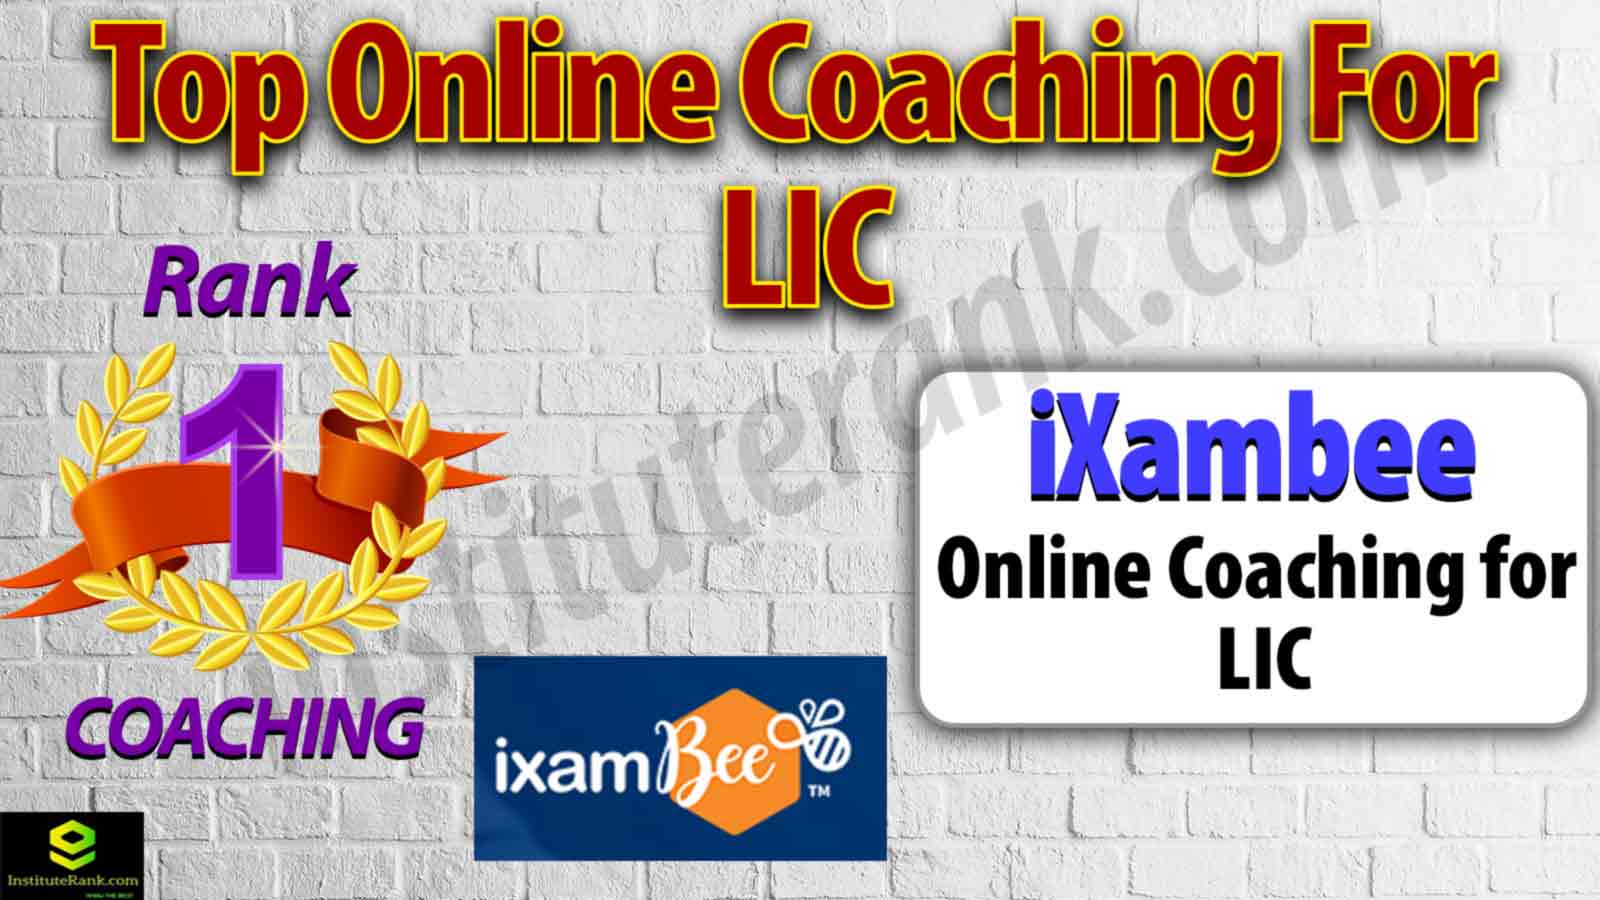 Top Online Coaching For LIC Examination